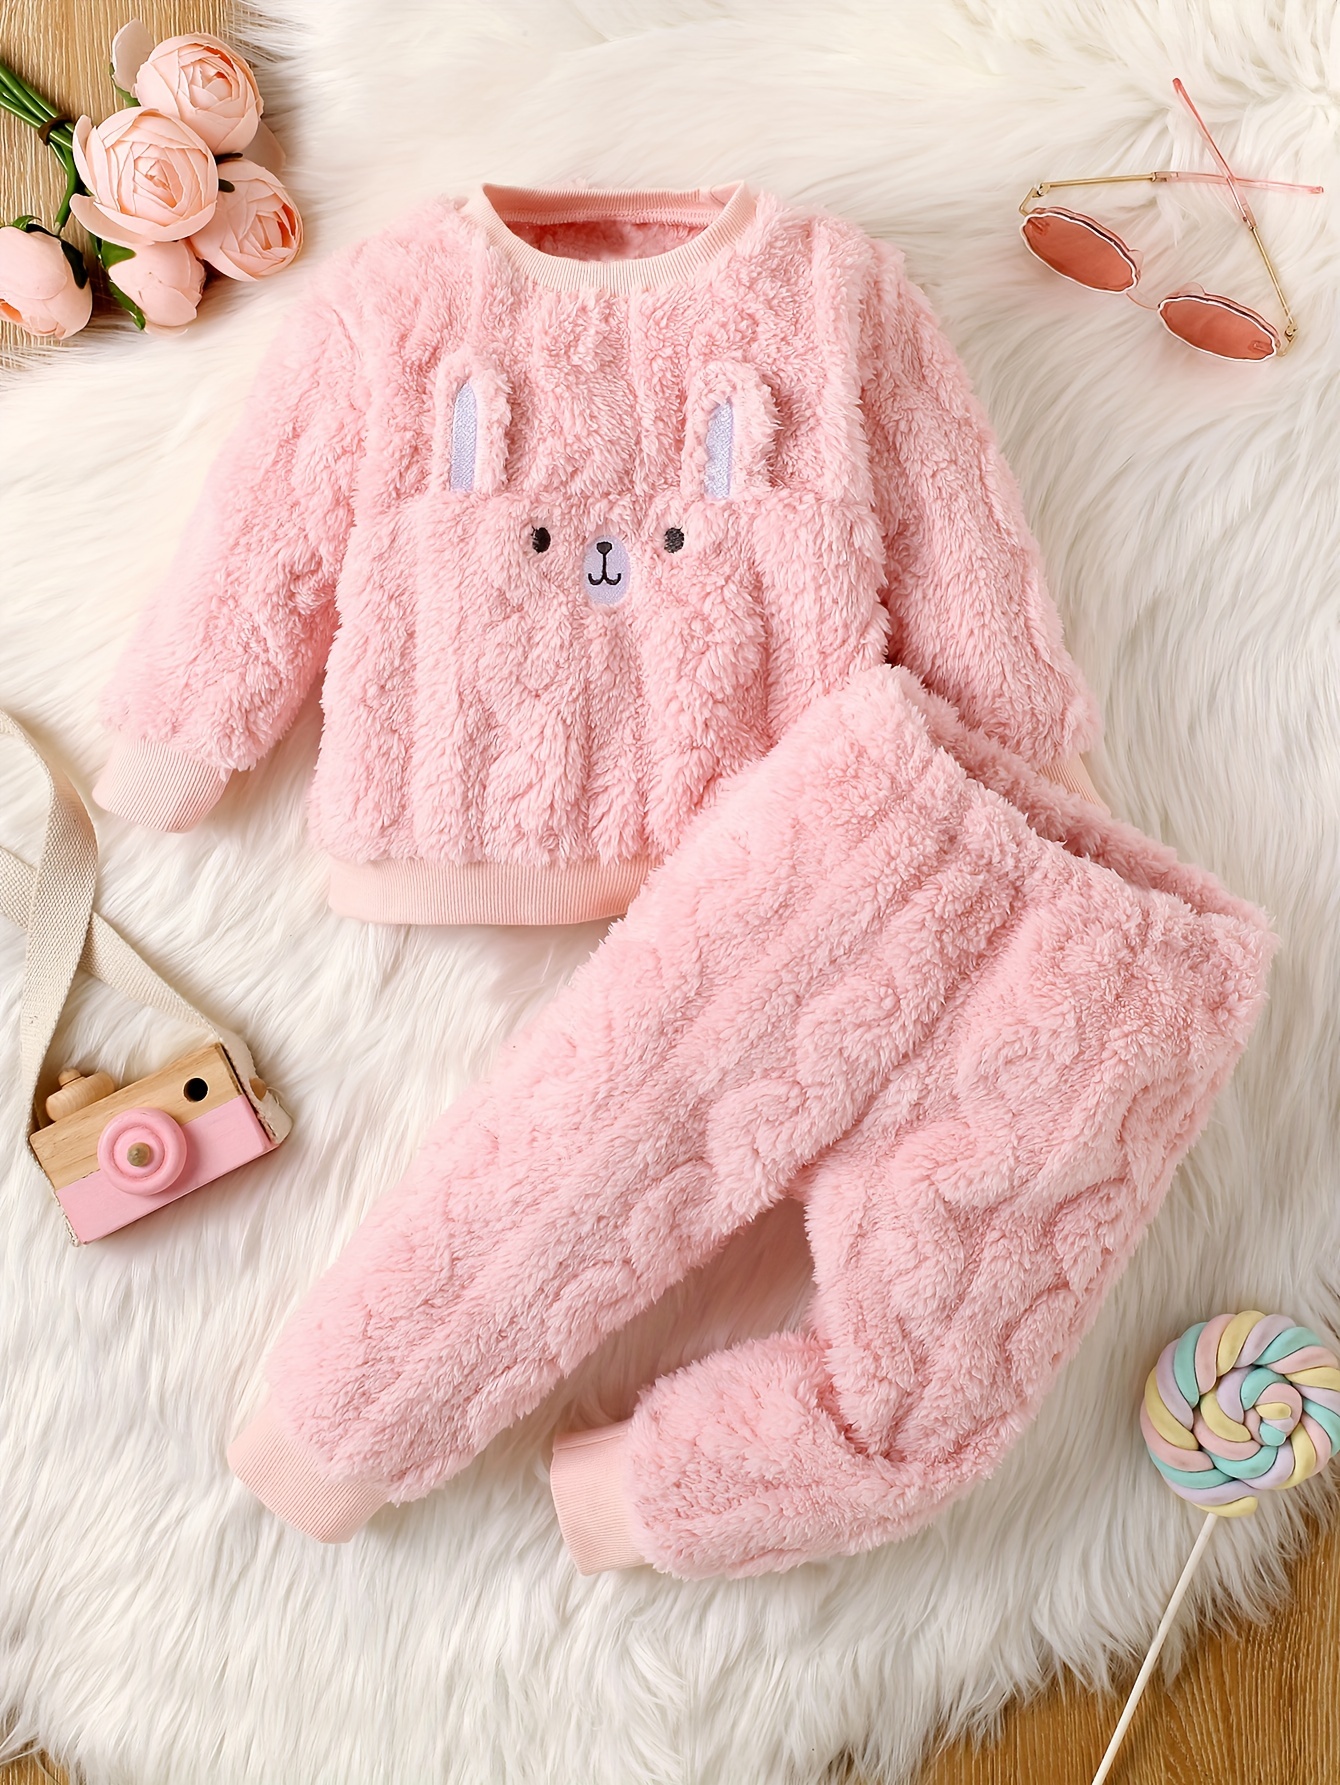 Cute & Warm: Girls Reversible Flannel Bunny Embroidered Top + Plush Pants  Set, 0-3 Years Old Kids Clothes Autumn And Winter